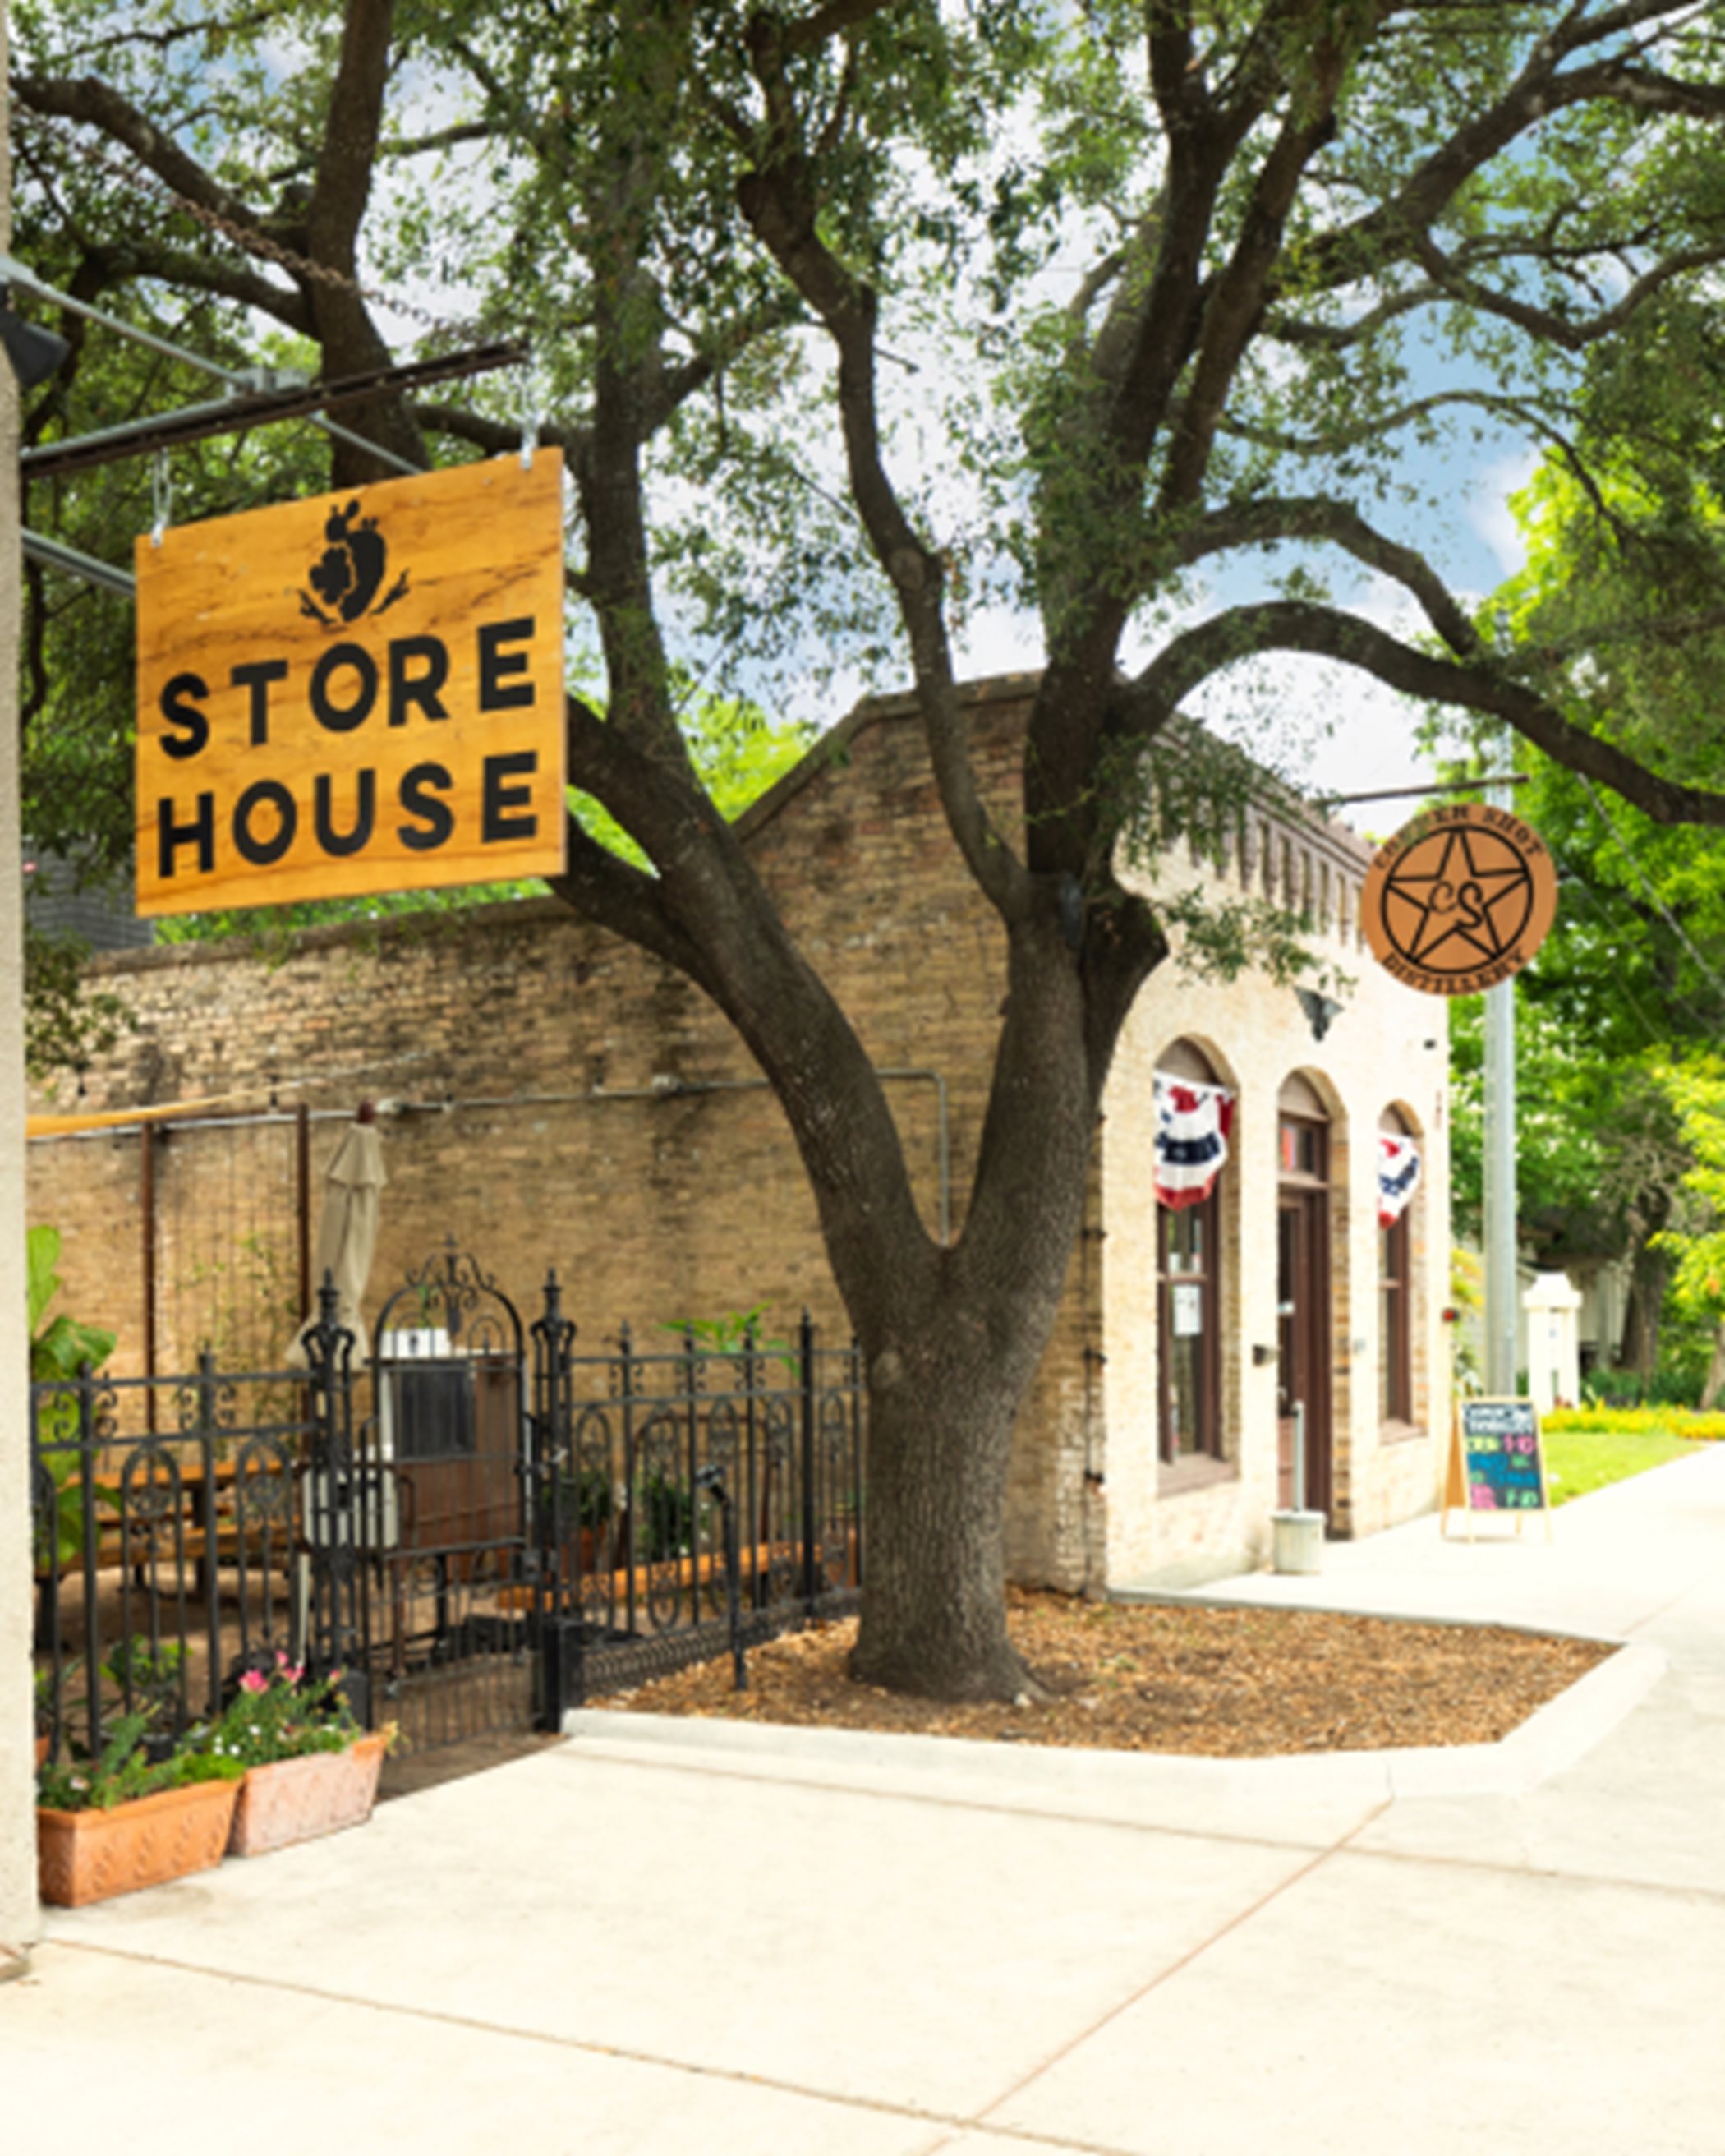 Store House Market & Eatery